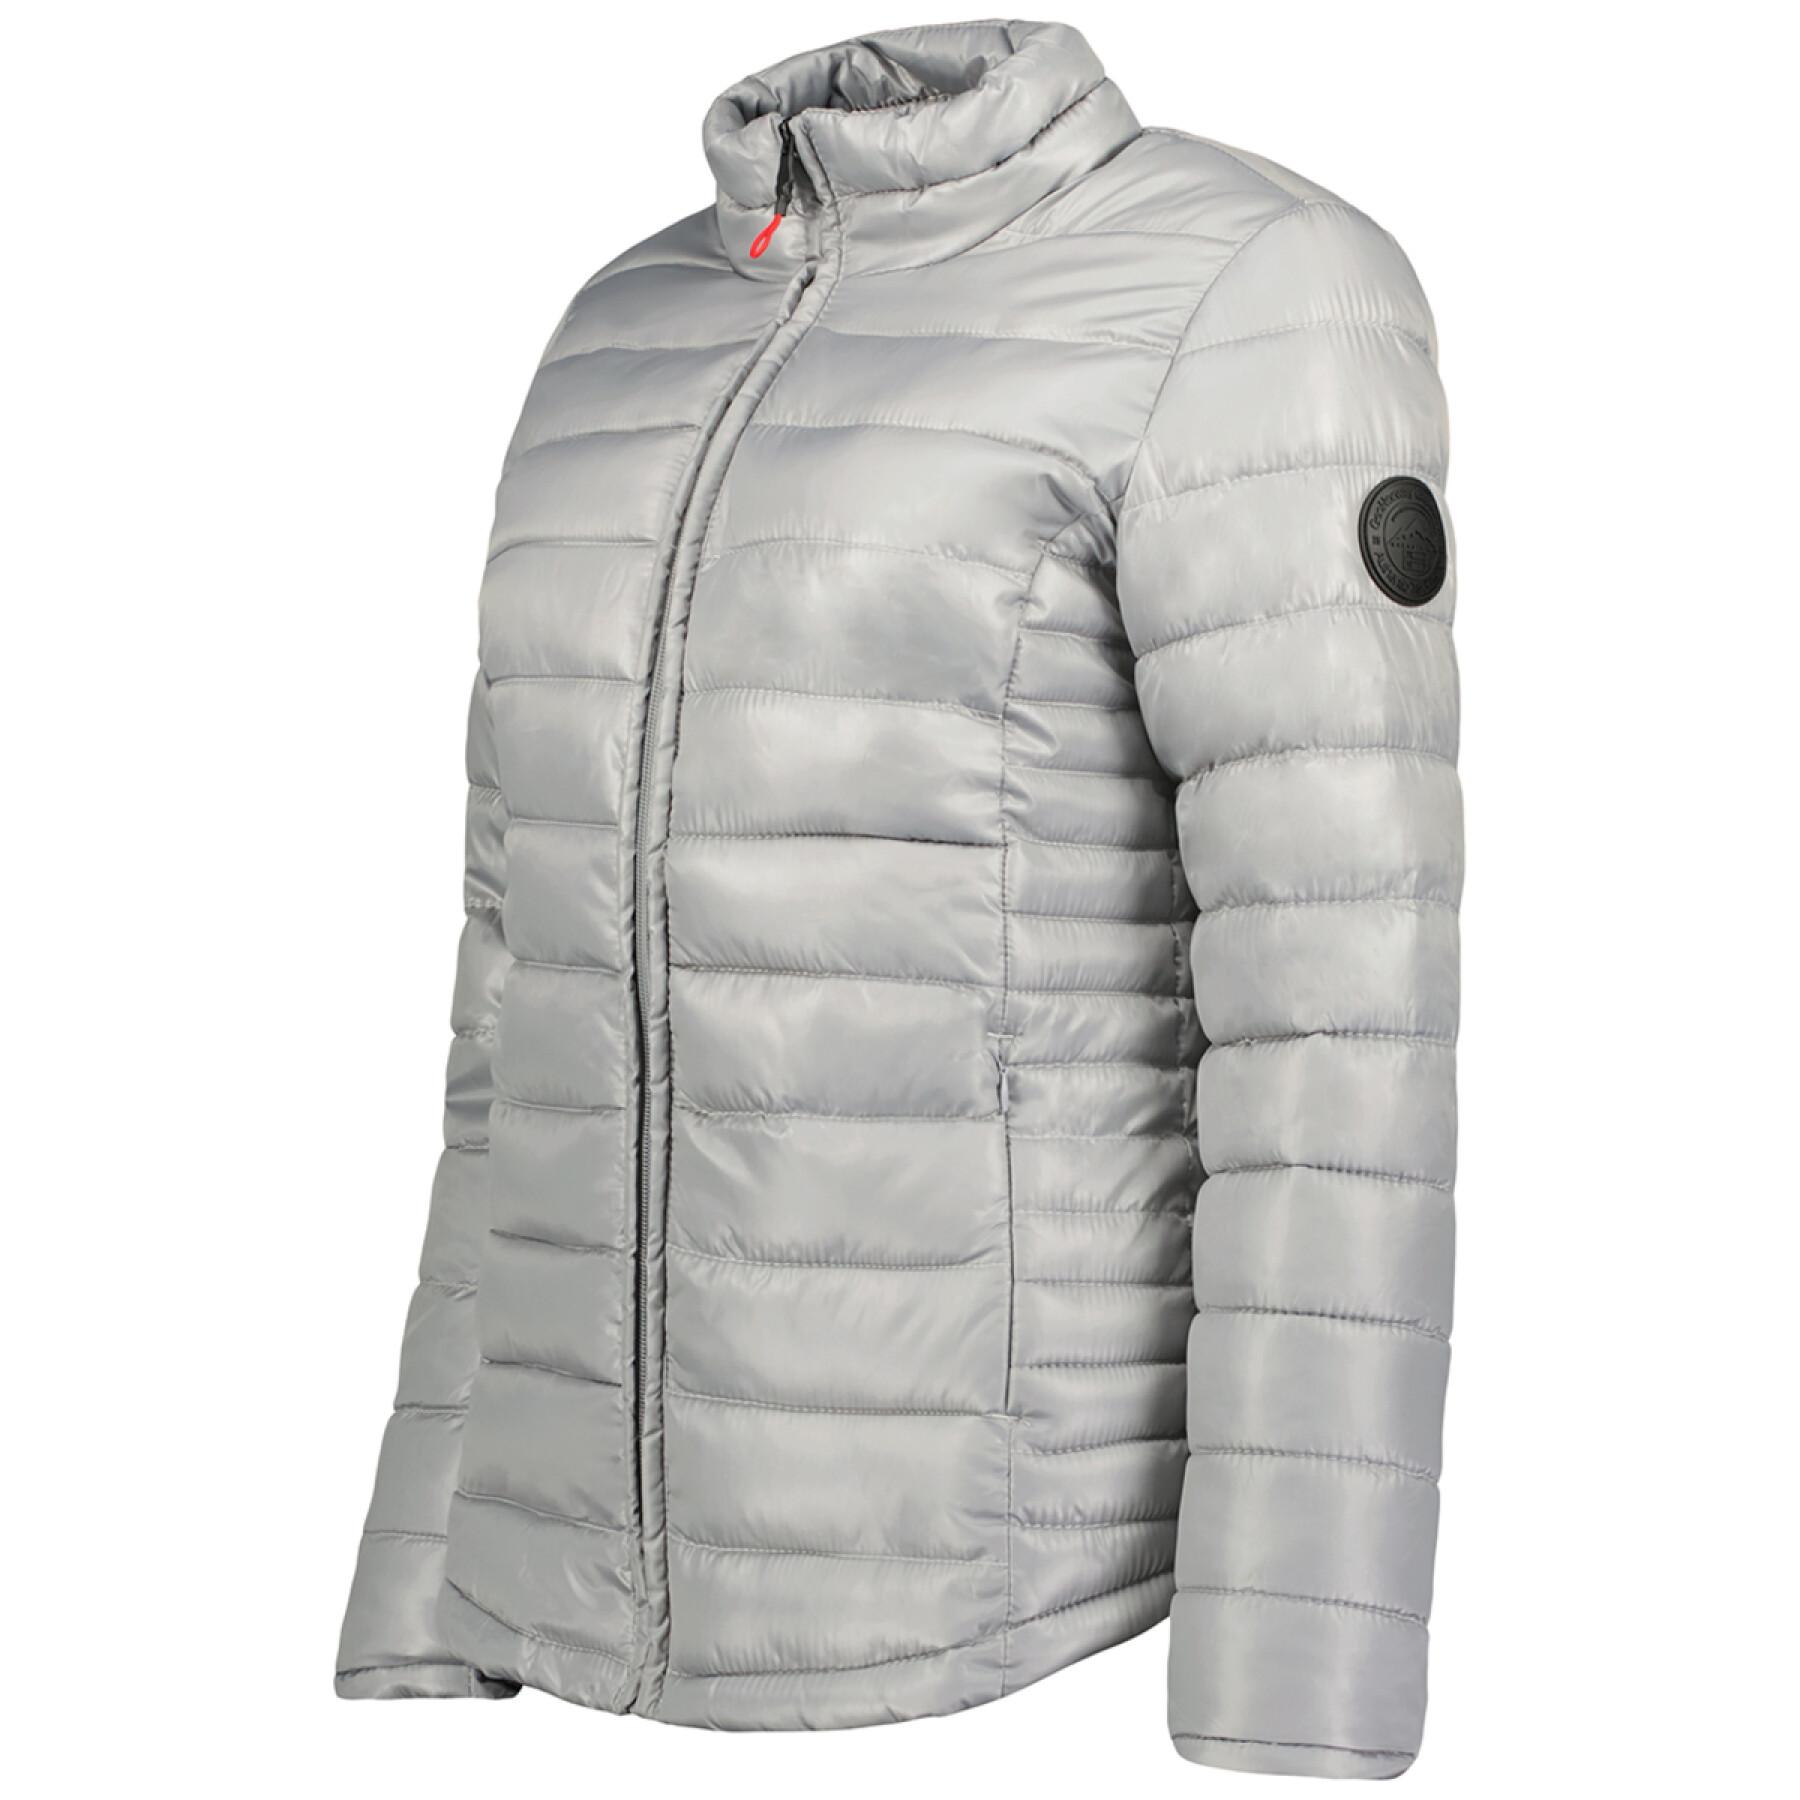 Donsjack voor dames Geographical Norway Annecy Basic Eo Db